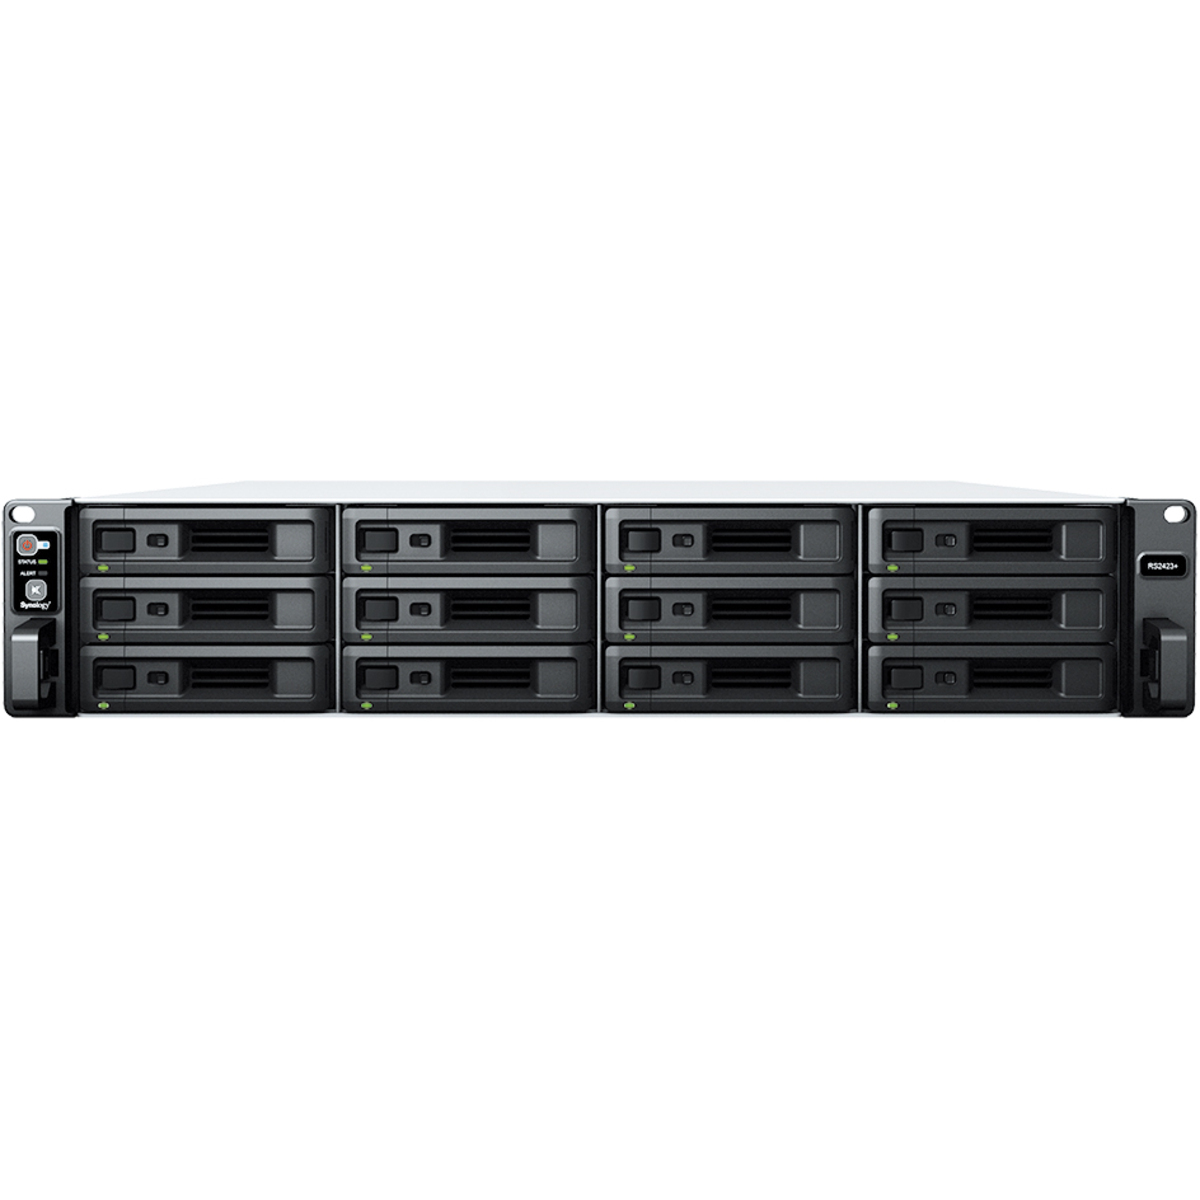 Synology RackStation RS2423RP+ 30.7tb 12-Bay RackMount Multimedia / Power User / Business NAS - Network Attached Storage Device 8x3.8tb Synology SAT5210 Series SAT5210-3840G 2.5 530/500MB/s SATA 6Gb/s SSD ENTERPRISE Class Drives Installed - Burn-In Tested - FREE RAM UPGRADE RackStation RS2423RP+